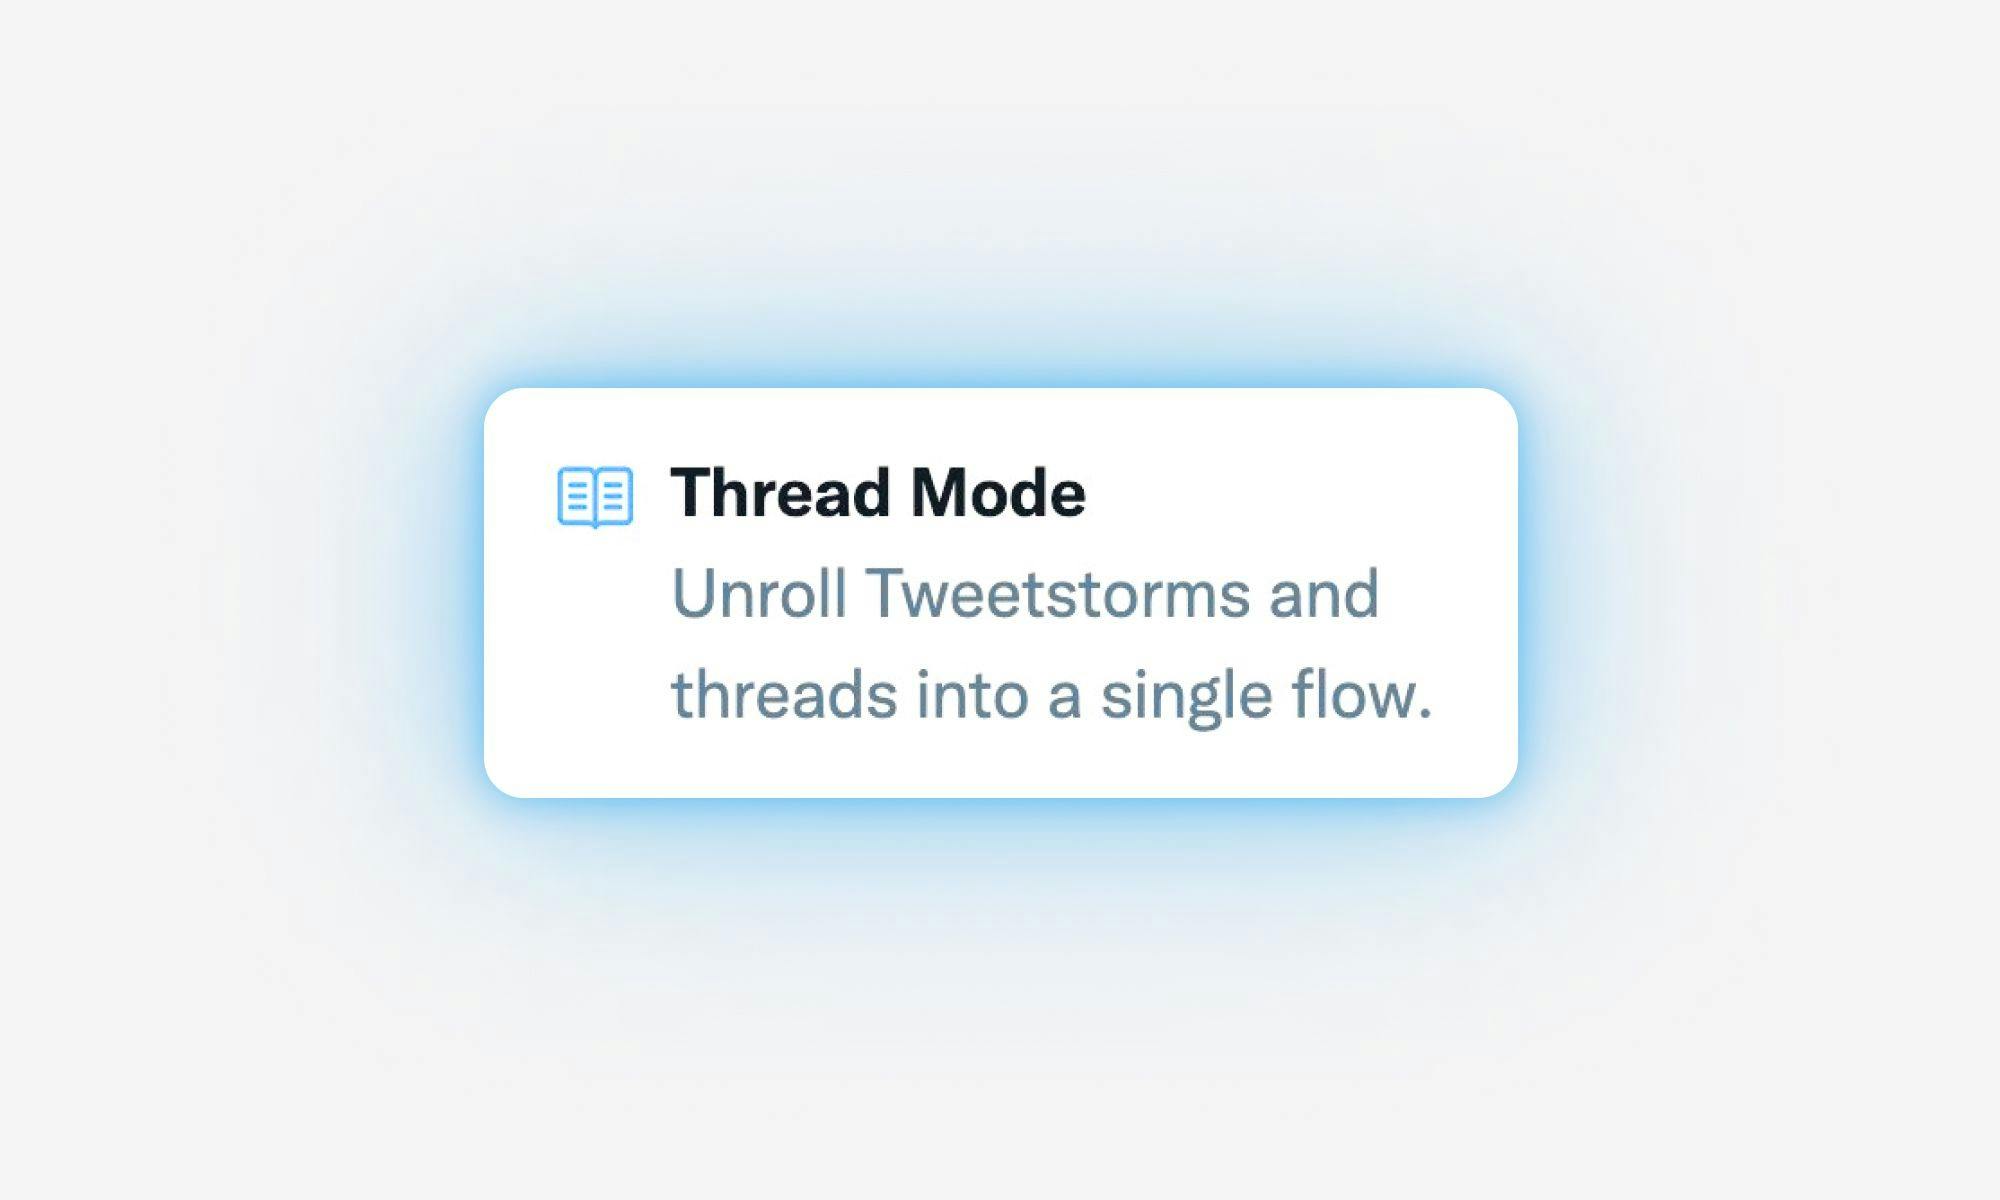 Why Twitter's new "Thread Mode" is a big deal